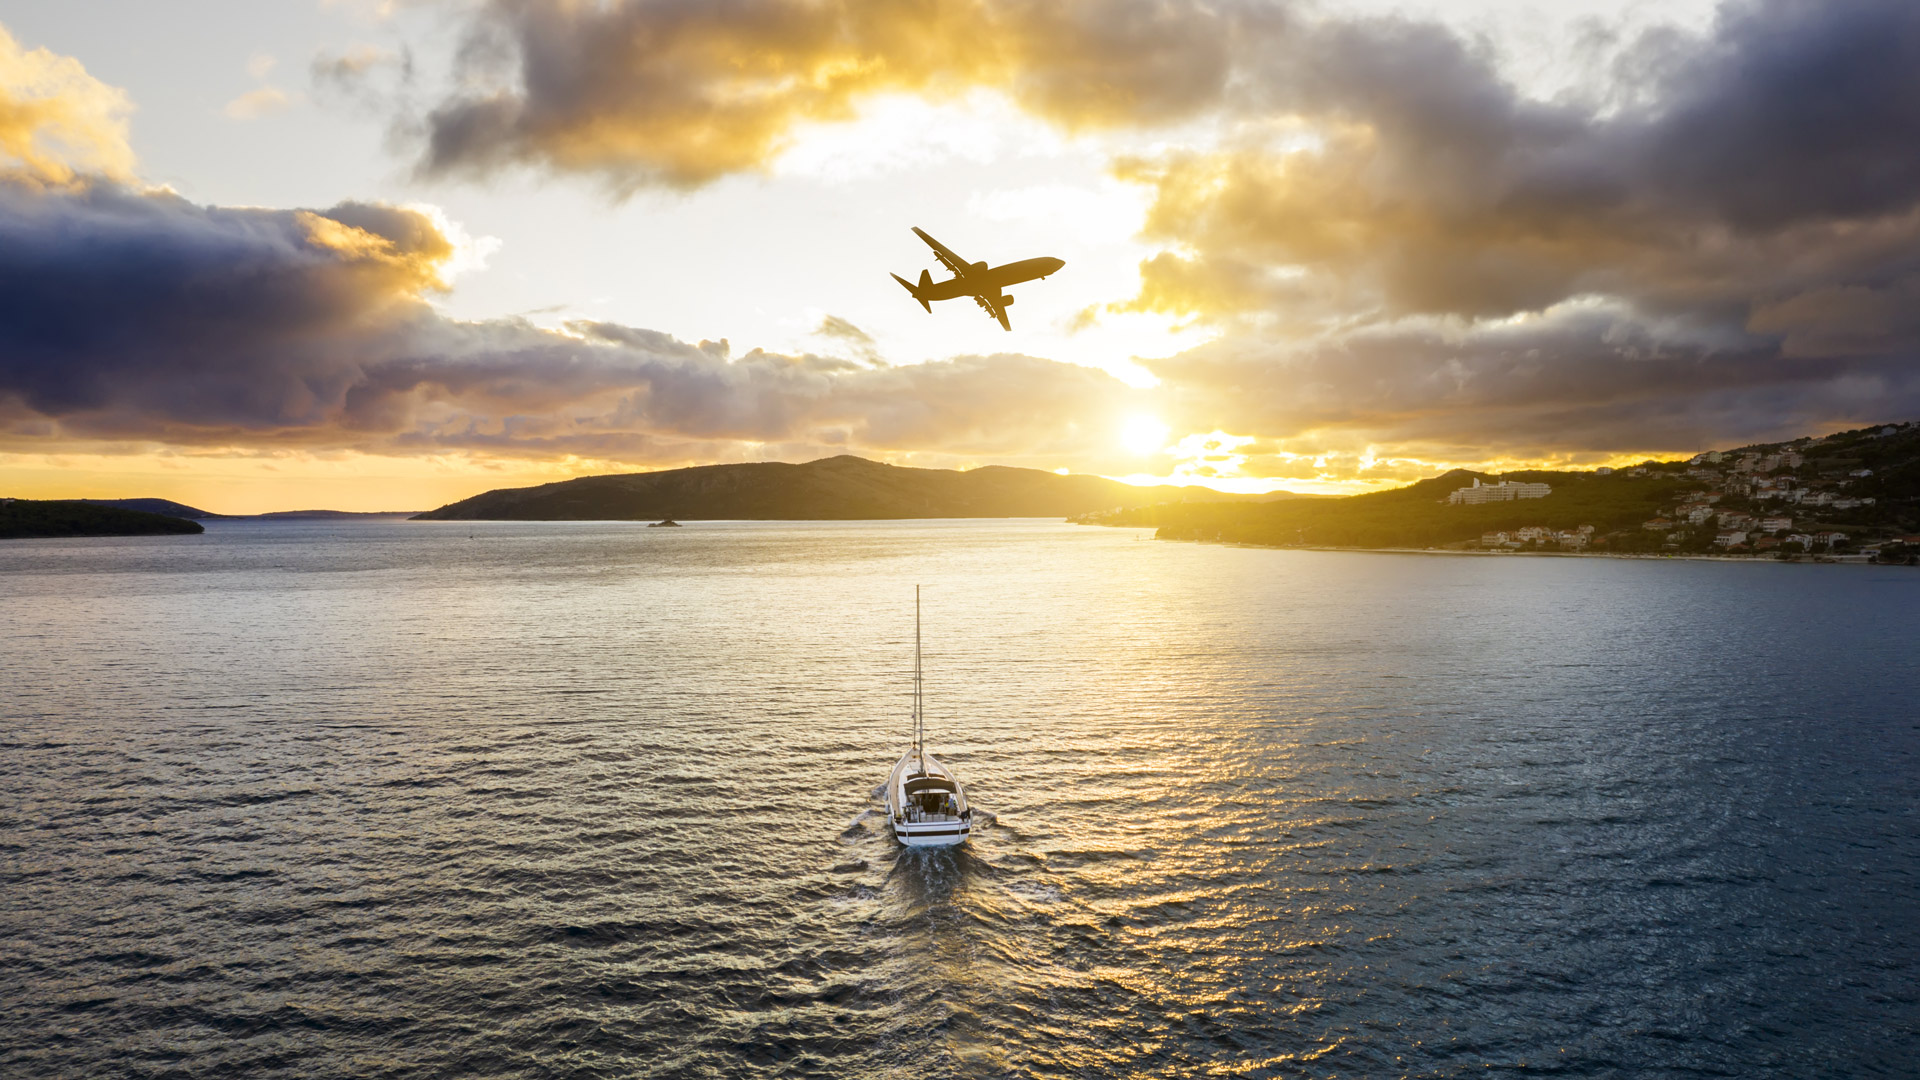 An airliner flies above a sailboat that’s alone on the sea at sunset, near some islands.